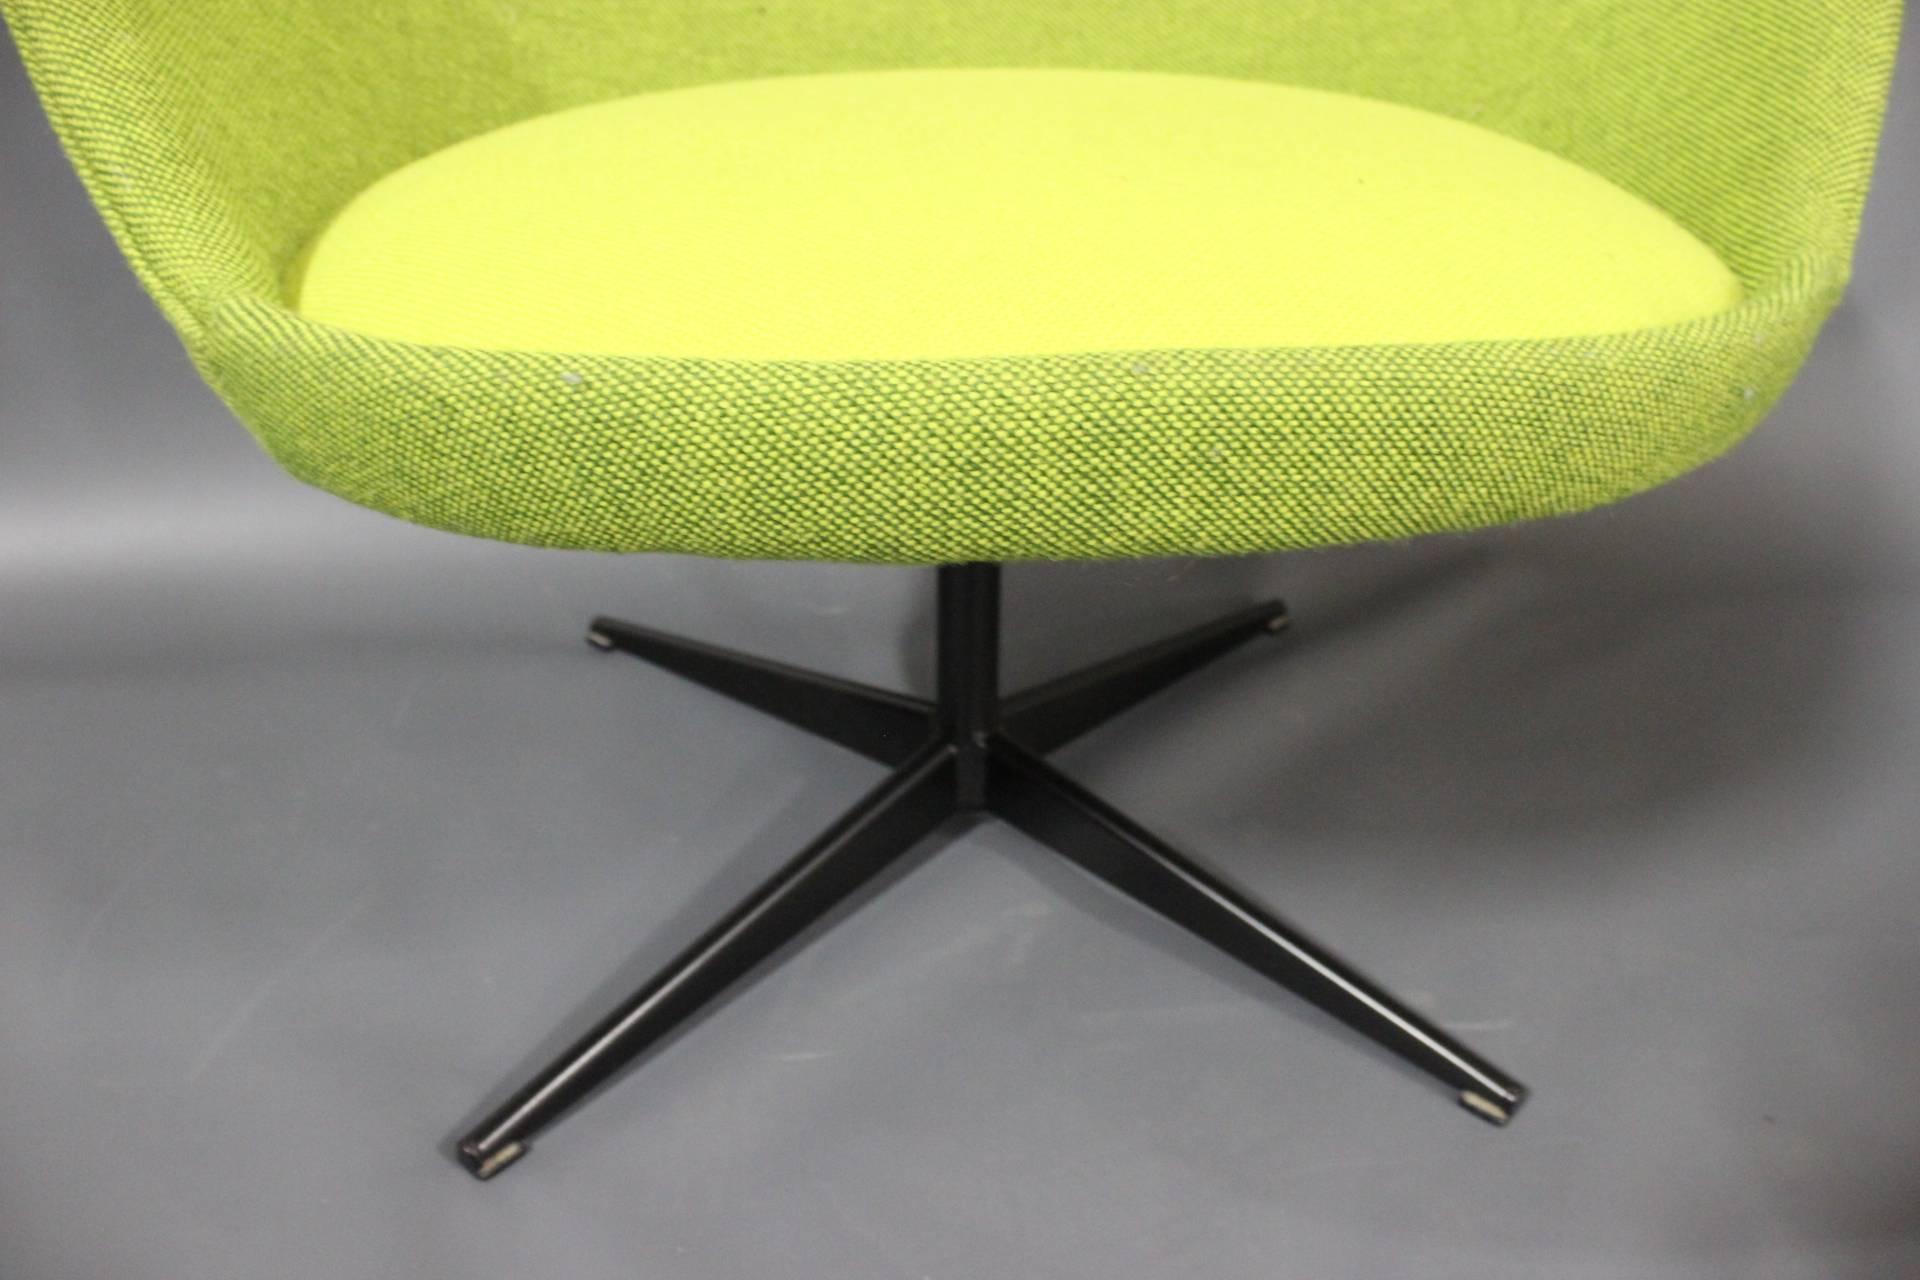 Lounge Chair in Green Hallingdal Wool, Danish Design from the 1960s For Sale 1